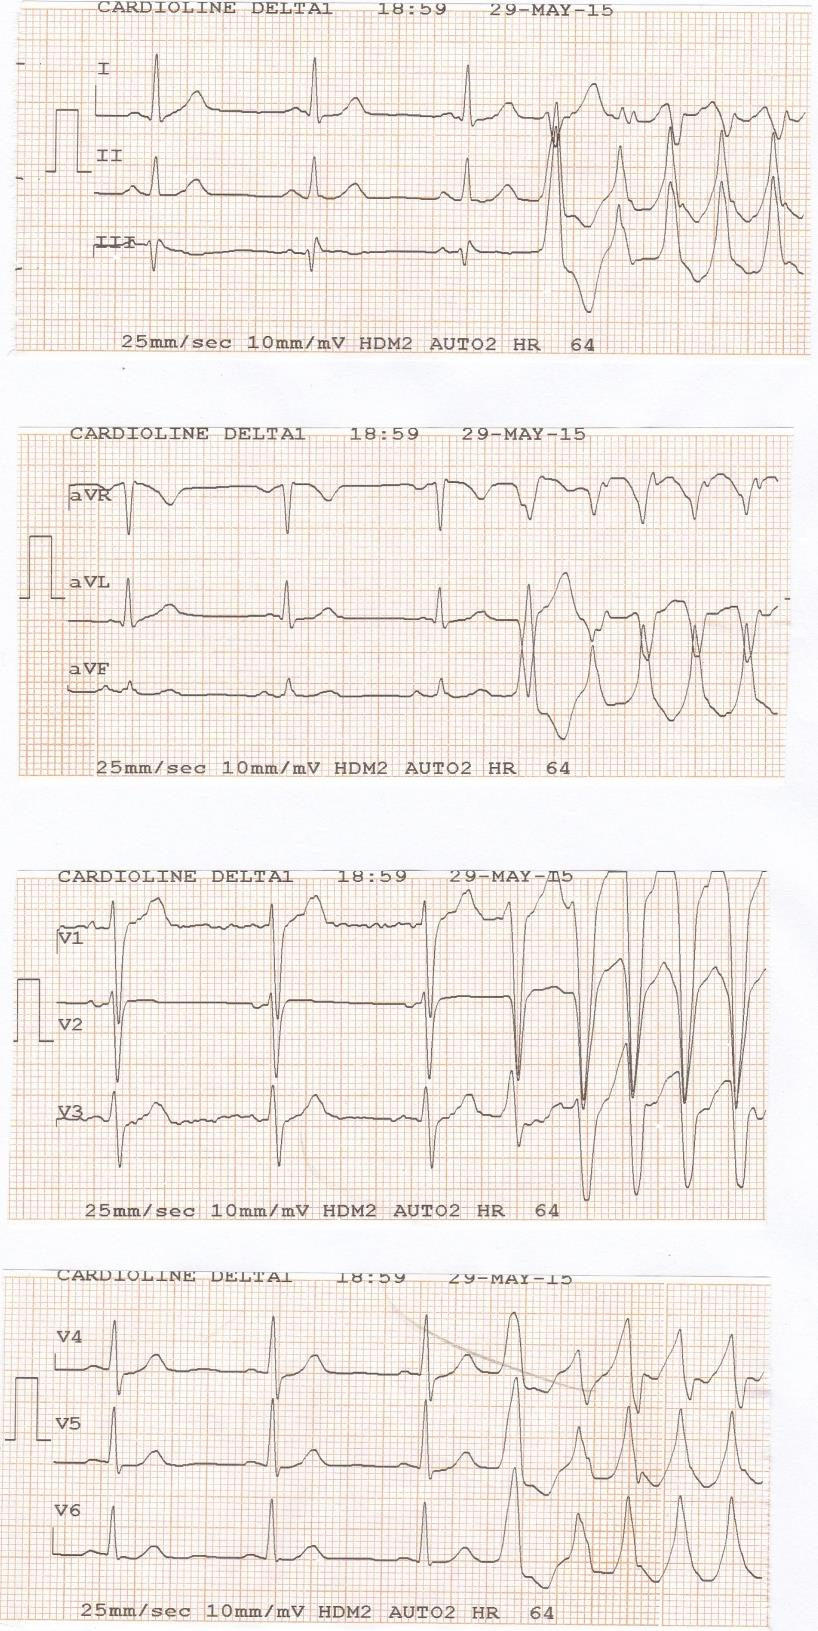 Idiopathic NSVT 47 years-old man Palpitations No structural Heart Disease